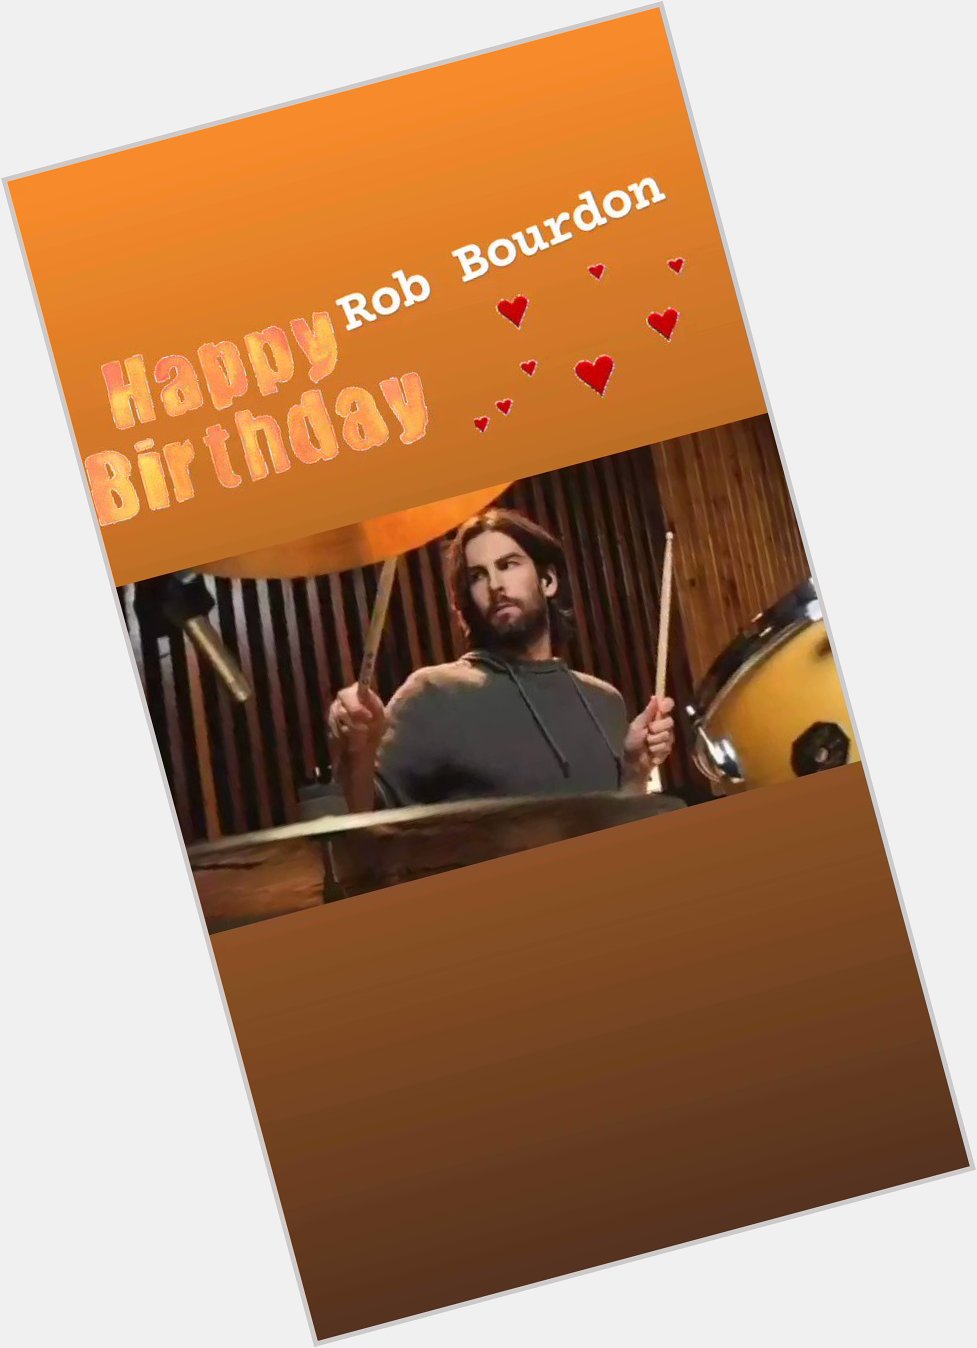 Happy Birthday, Rob Bourdon       my most beloved battery of all    